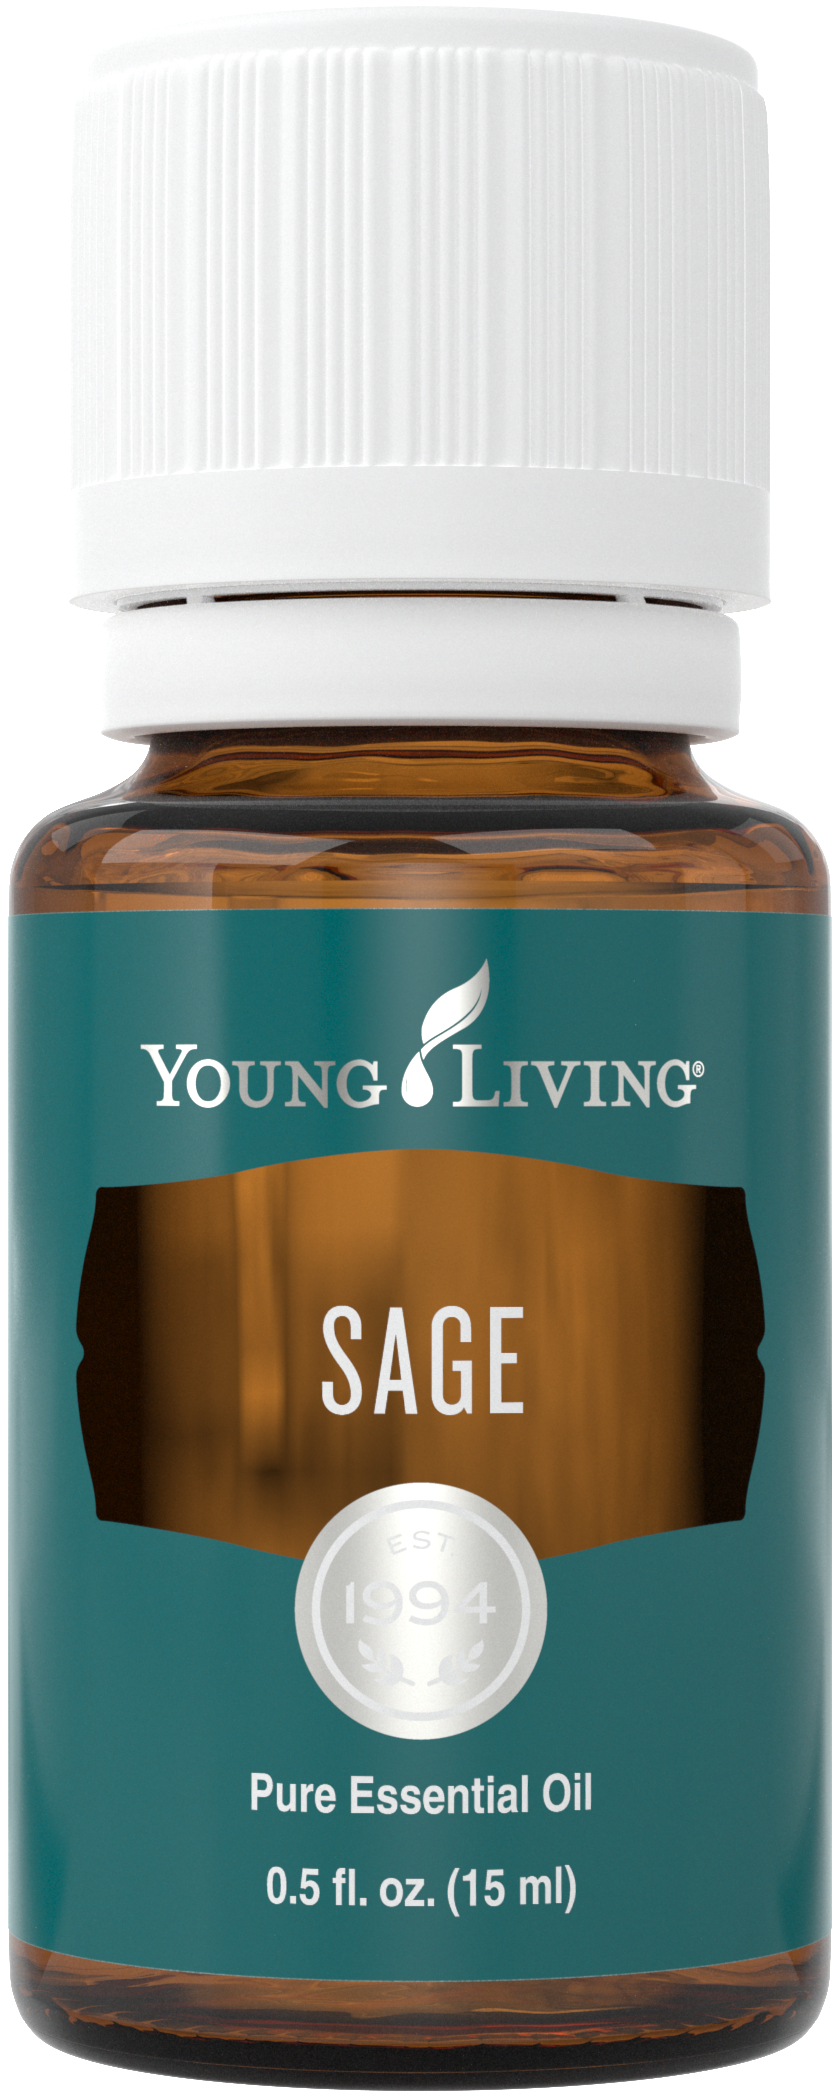 Sage Essential Oil - Young Living Essential Oils 